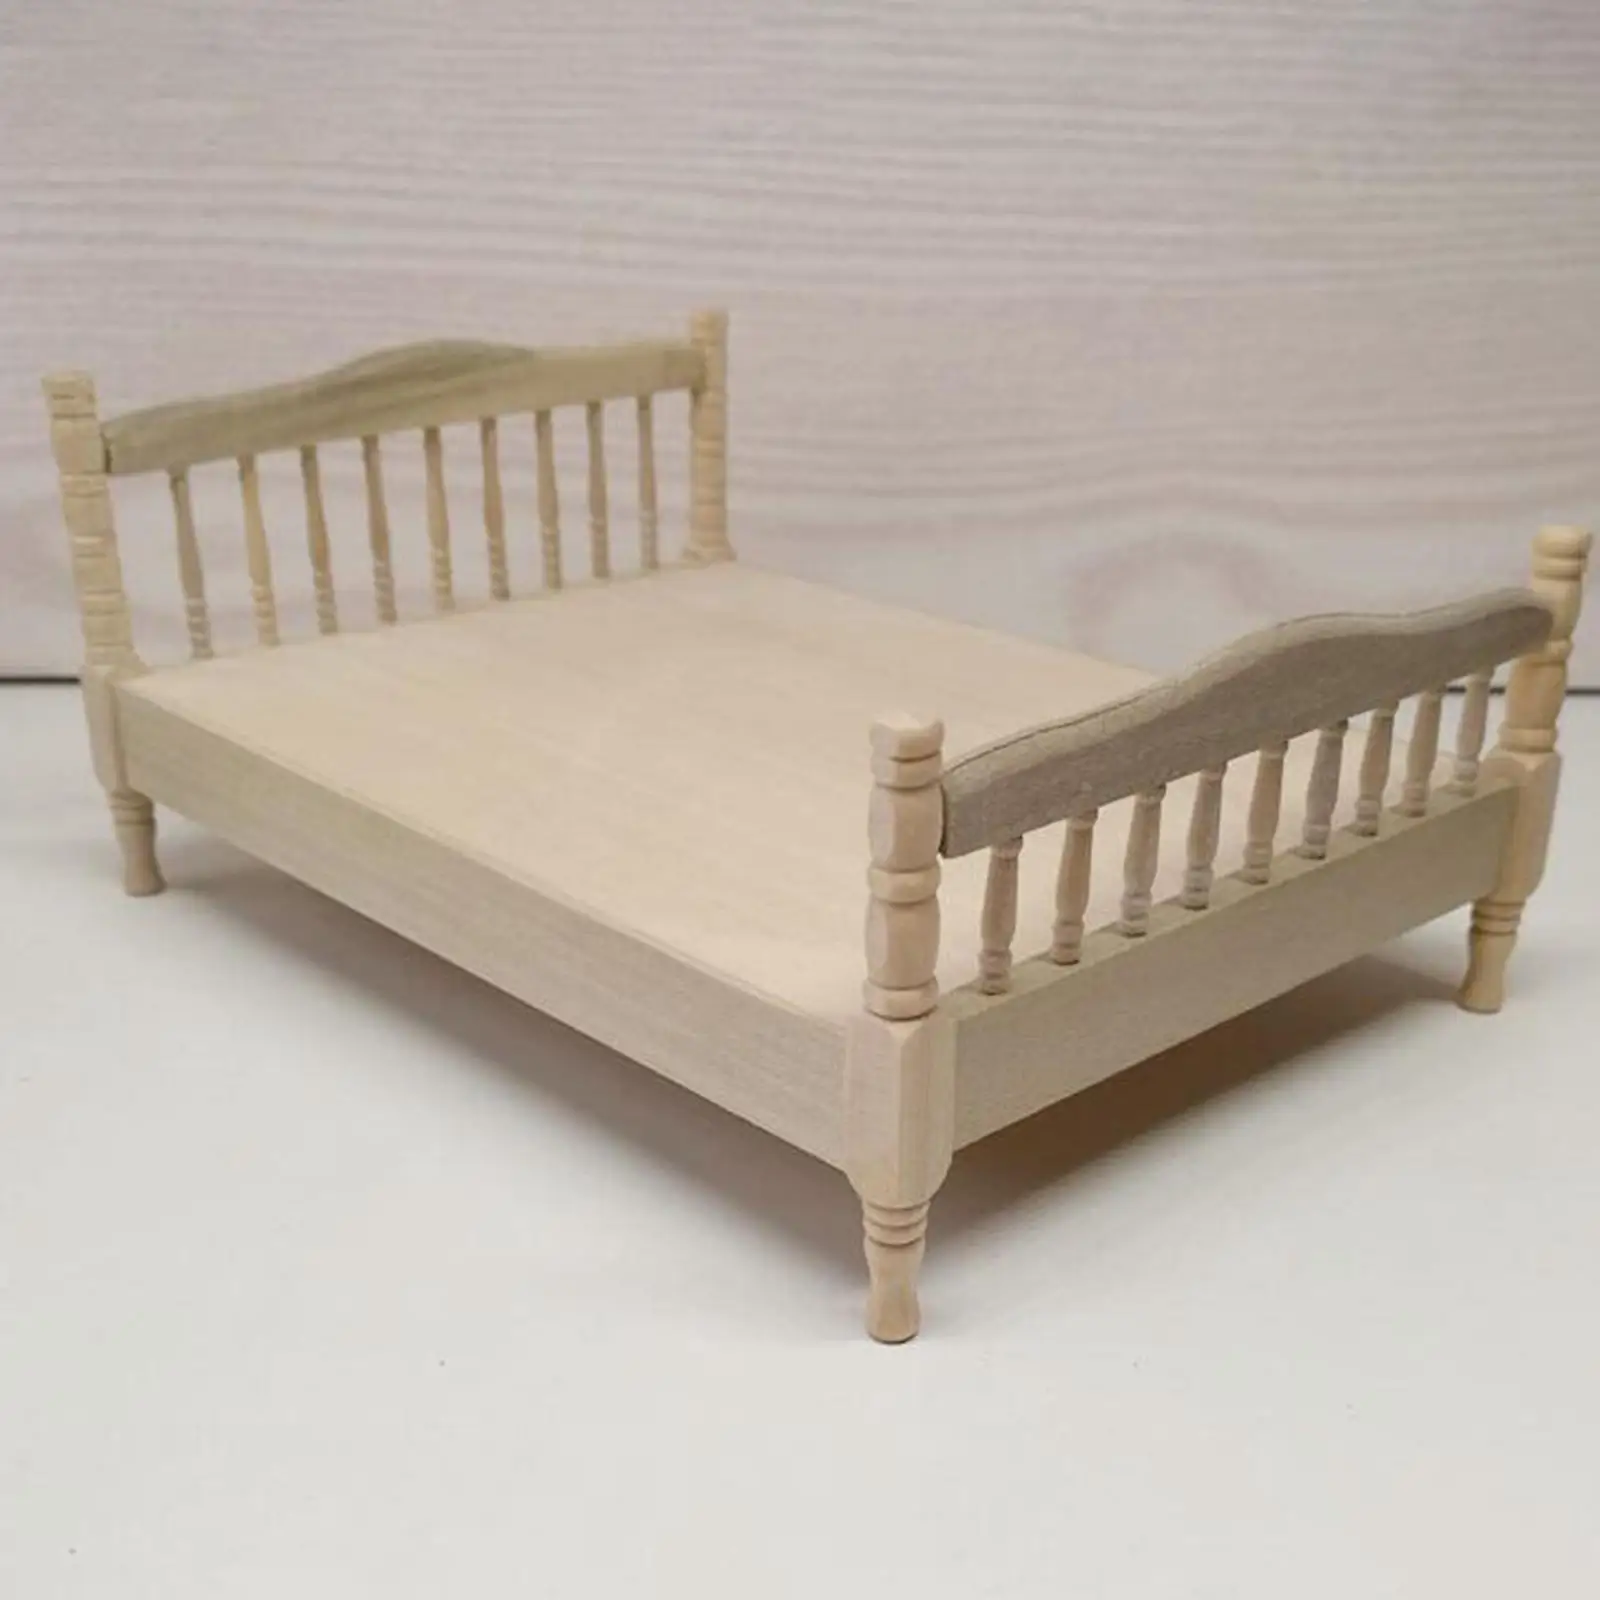 1:12 European Double Bed Model Miniature Bedroom Furniture for DIY Projects Architectural Fairy Garden Accessories DIY Scenery